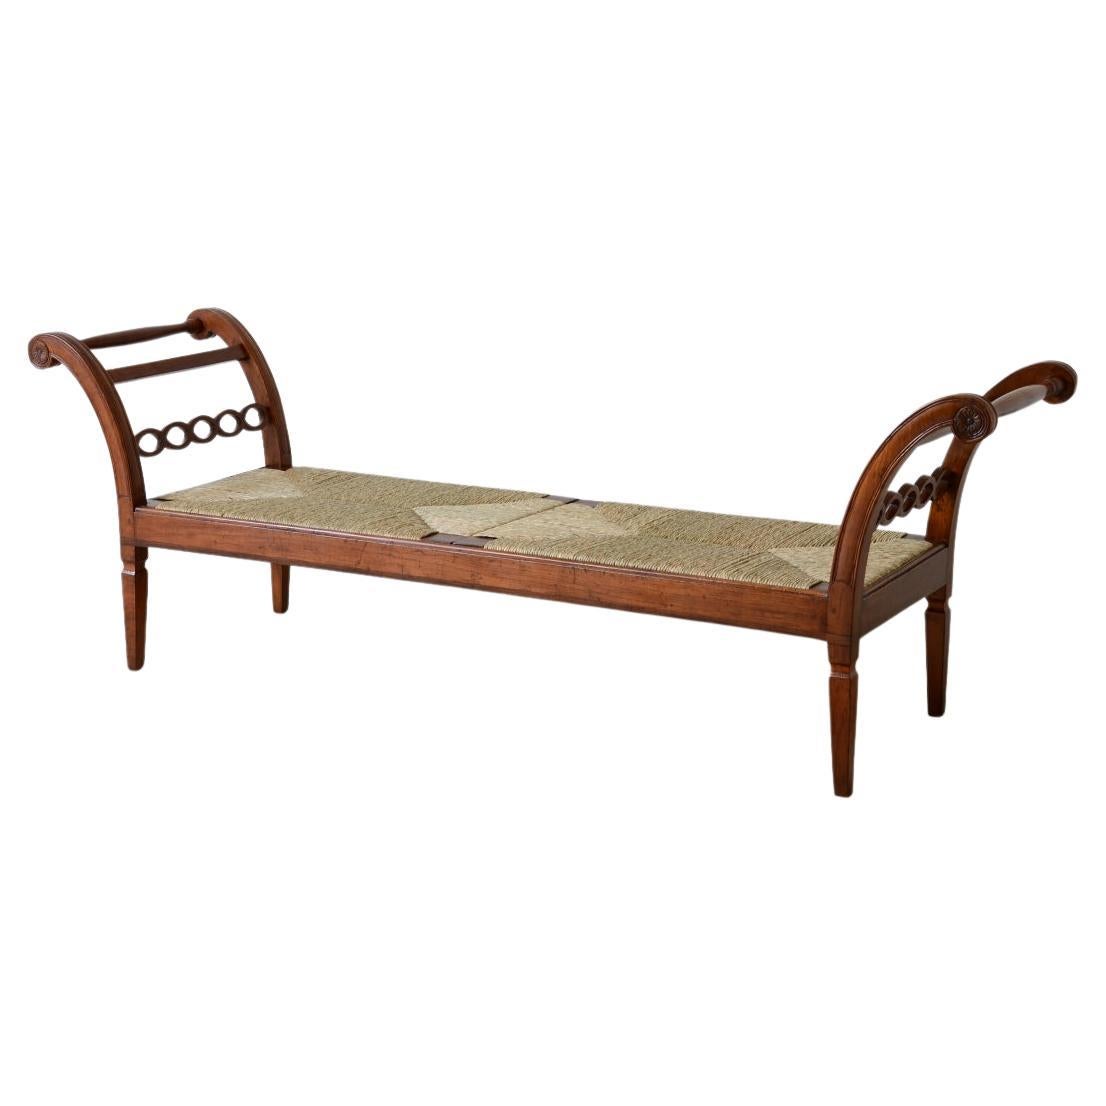 Large cherry wood bench with beautiful chain decoration